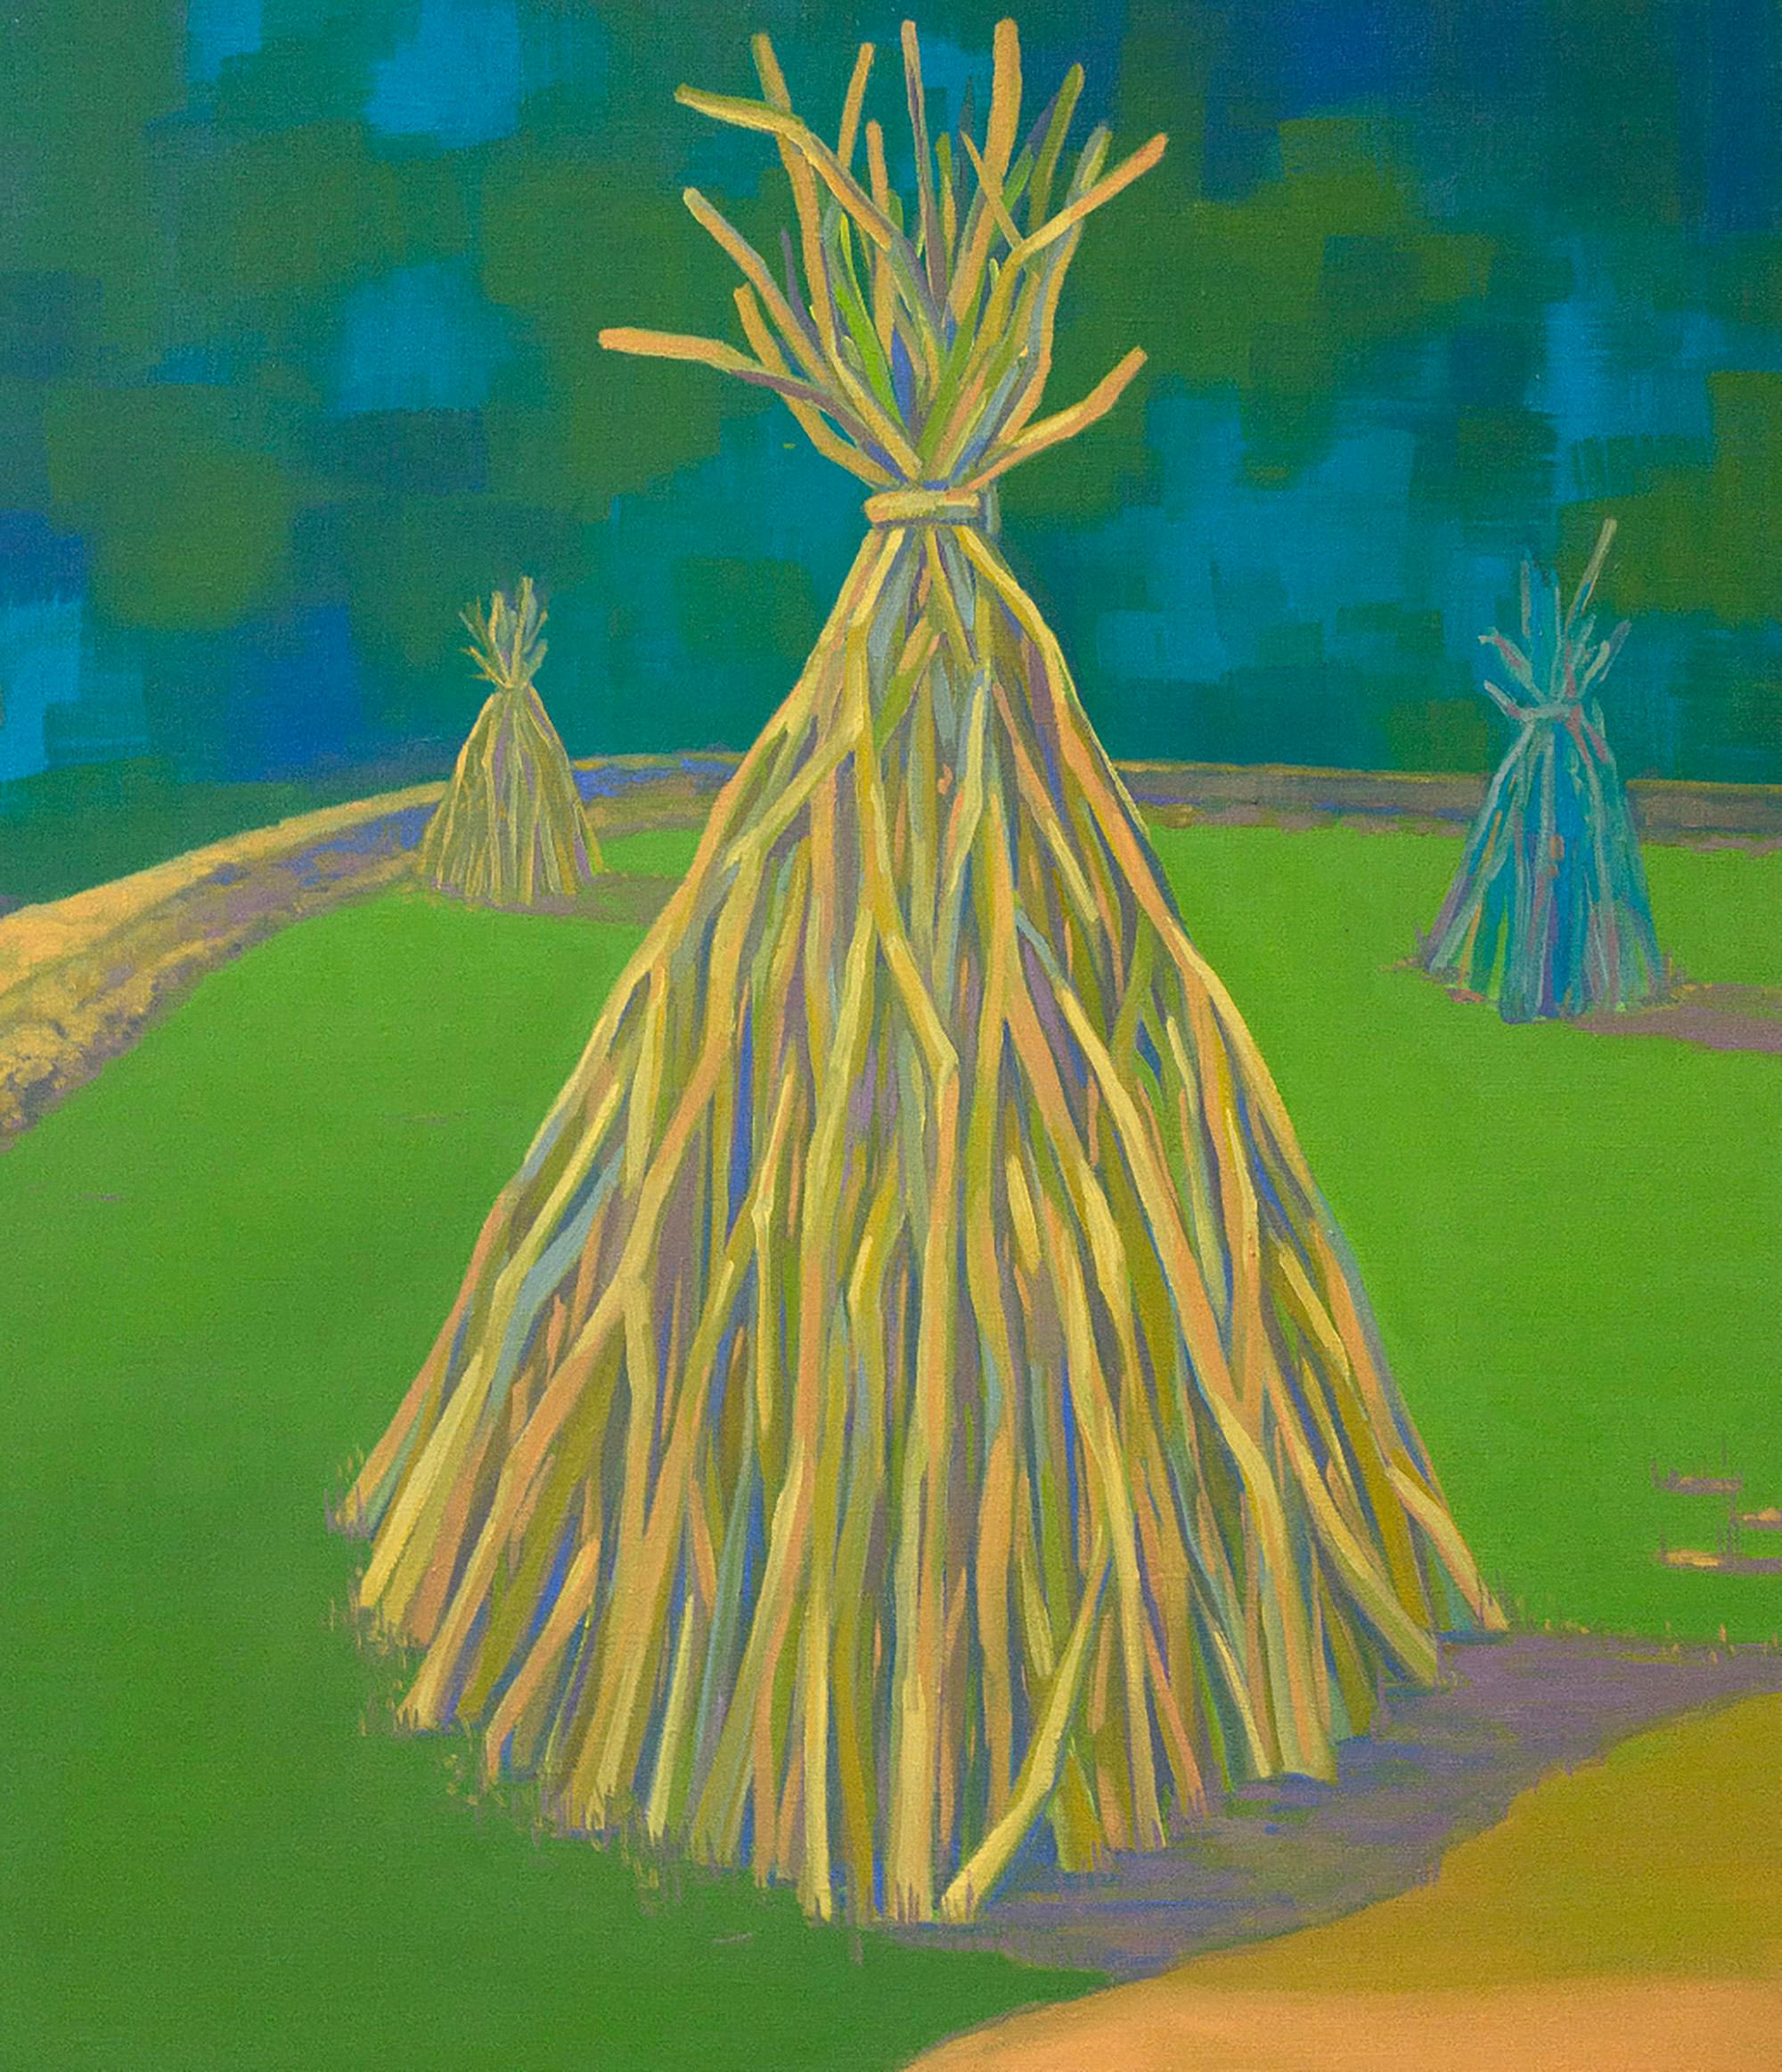 Anna Ortiz Figurative Painting - "TEE-PEES", oil painting on canvas, habitat, home, shelter, storm, wood, blue